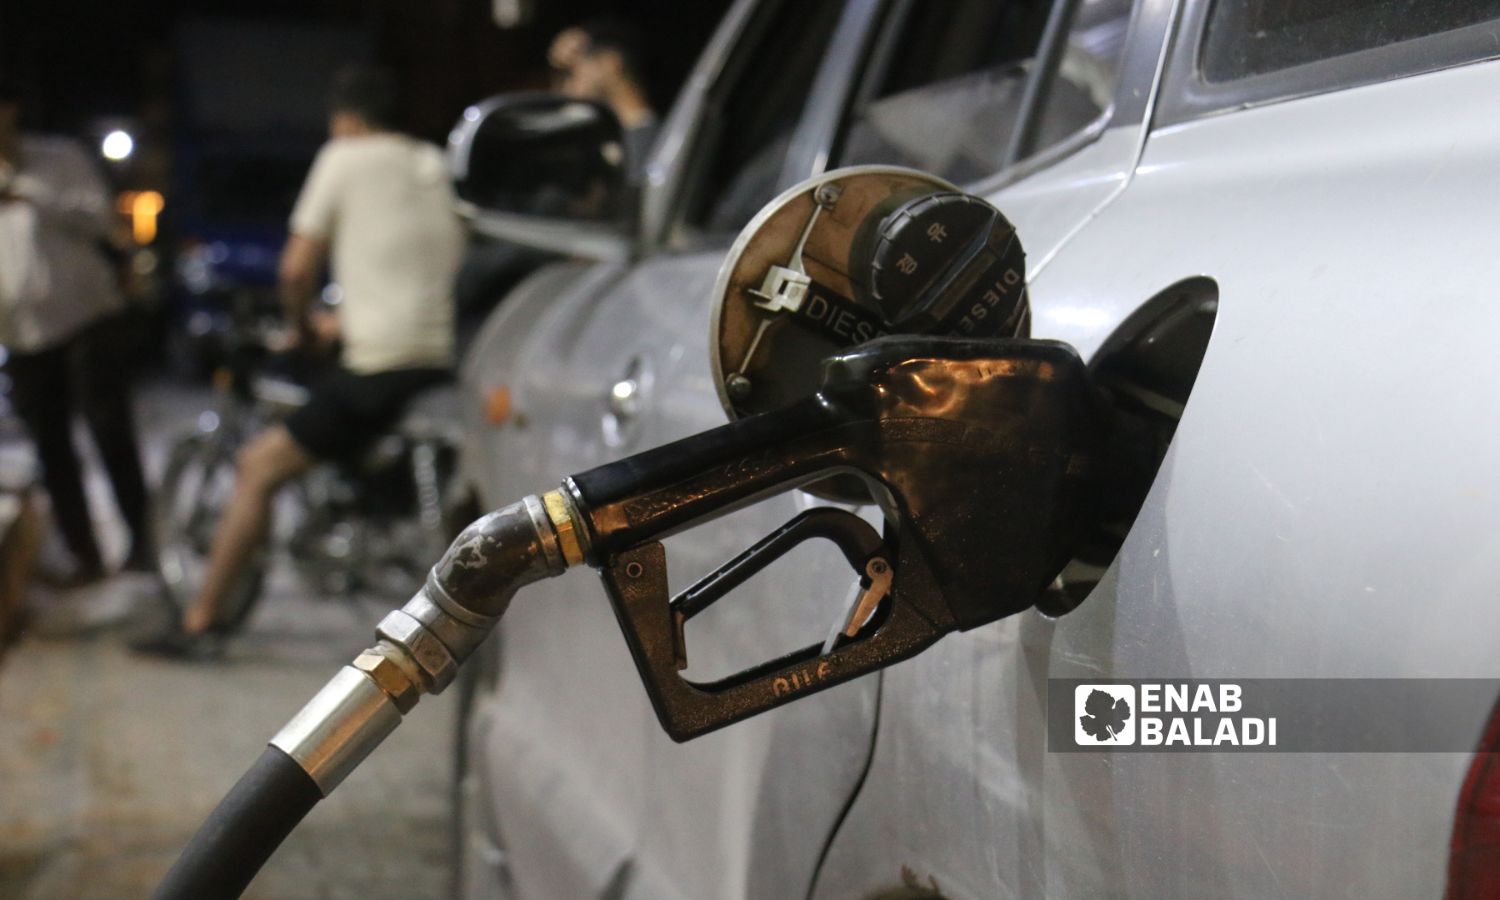 Fuel prices increased in Azaz with the decline in the exchange rate of the Turkish lira in July 2023 (Enab Baladi/Dayan Junpaz)